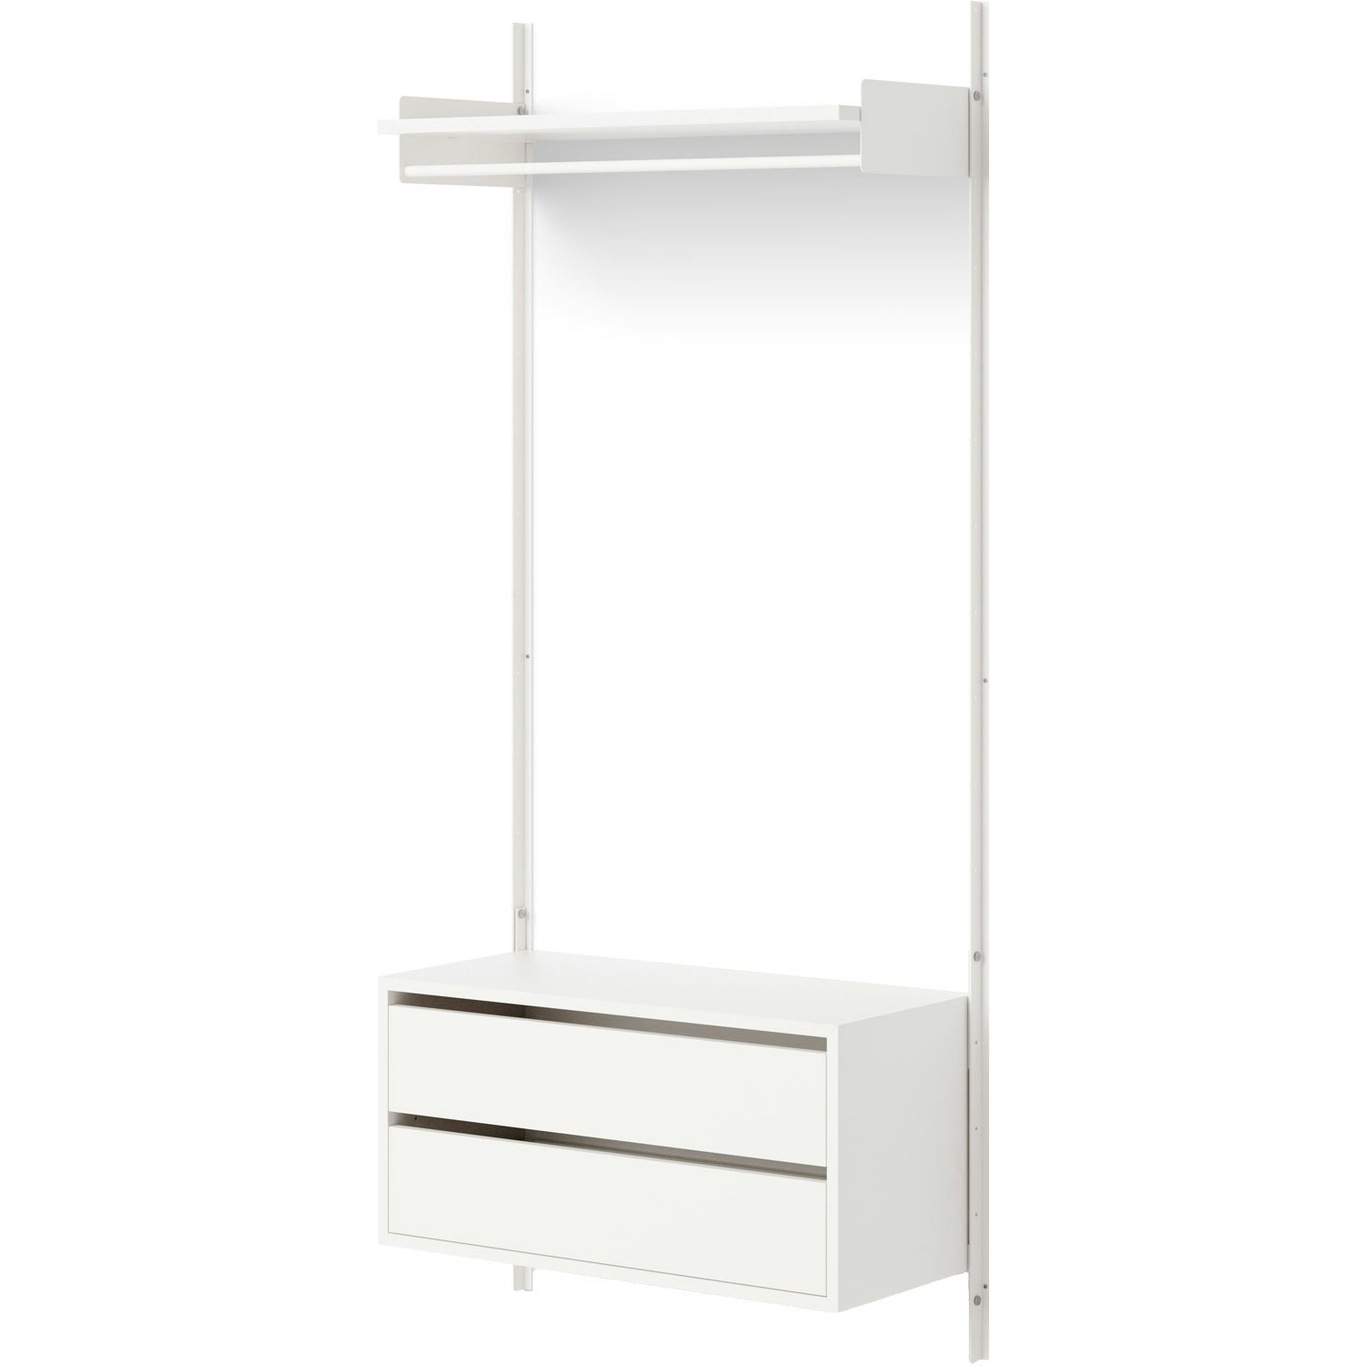 Wardrobe Wall Shelf 1 Cabinet With Drawers, White